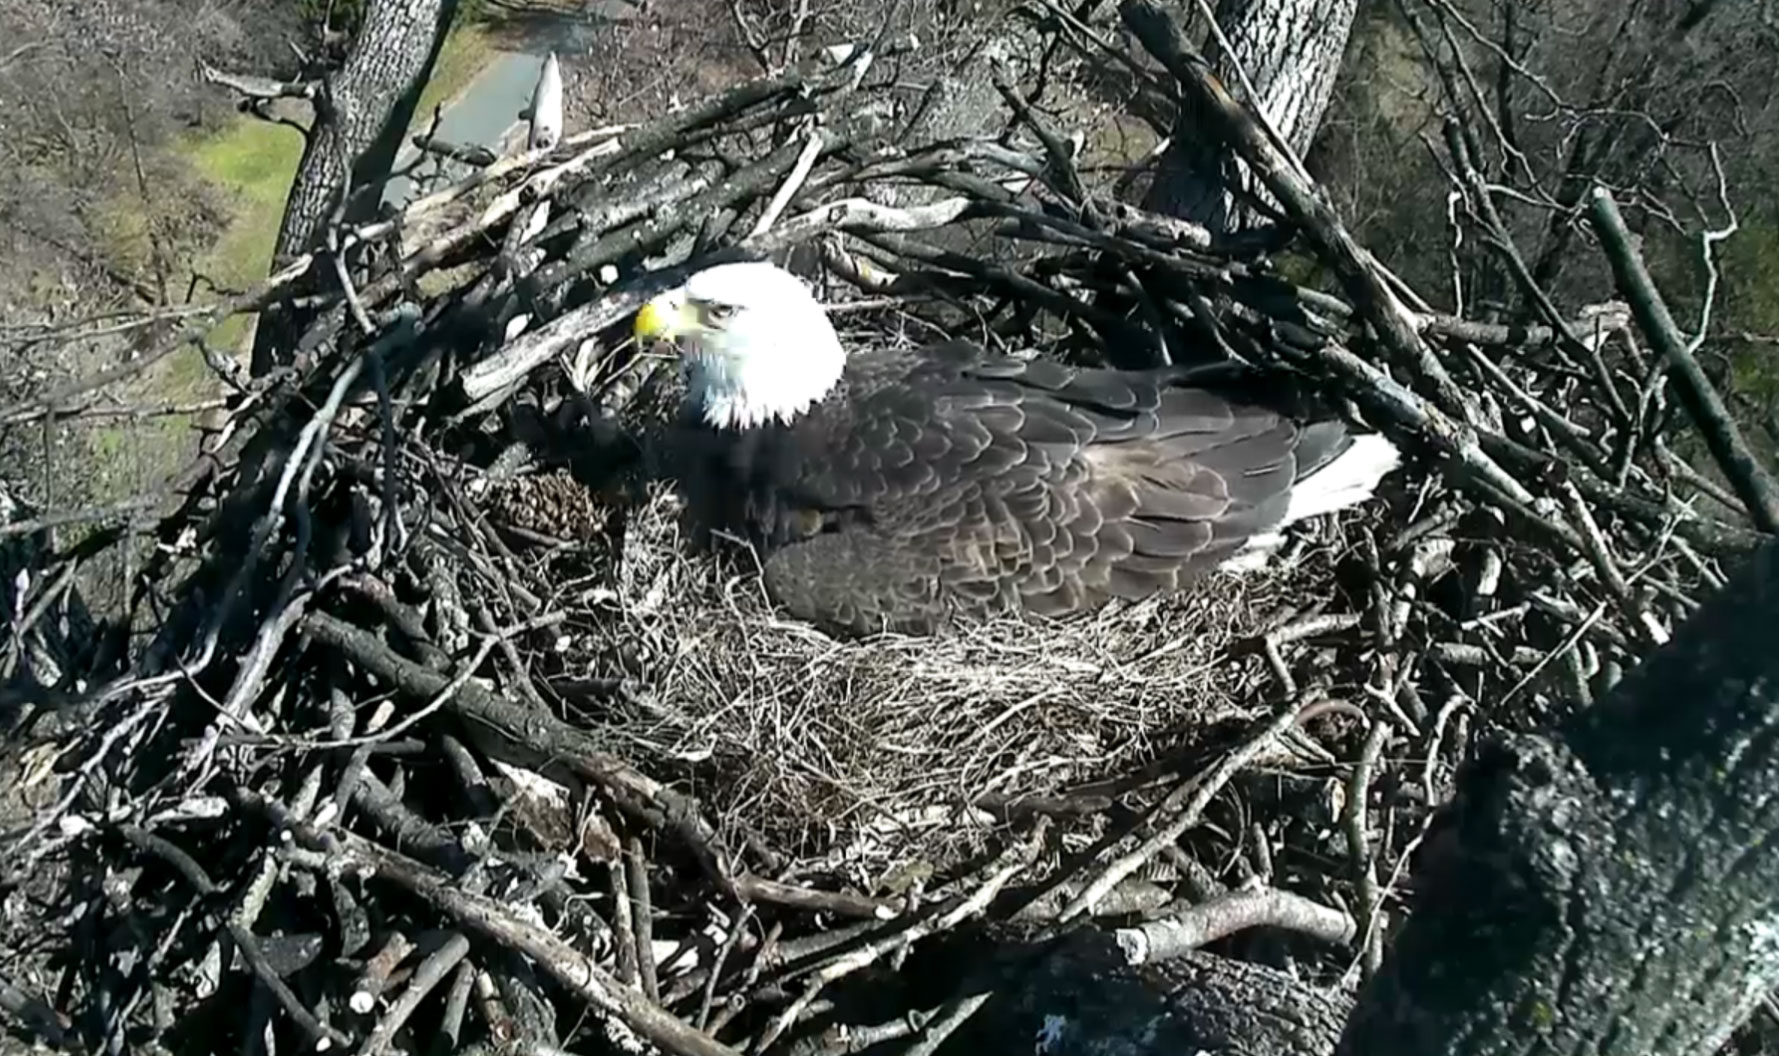 11:30 a.m. Feb. 18: After a short flight, one of the eagles nestles back in. (© 2016 American Eagle Foundation, EAGLES.ORG.)